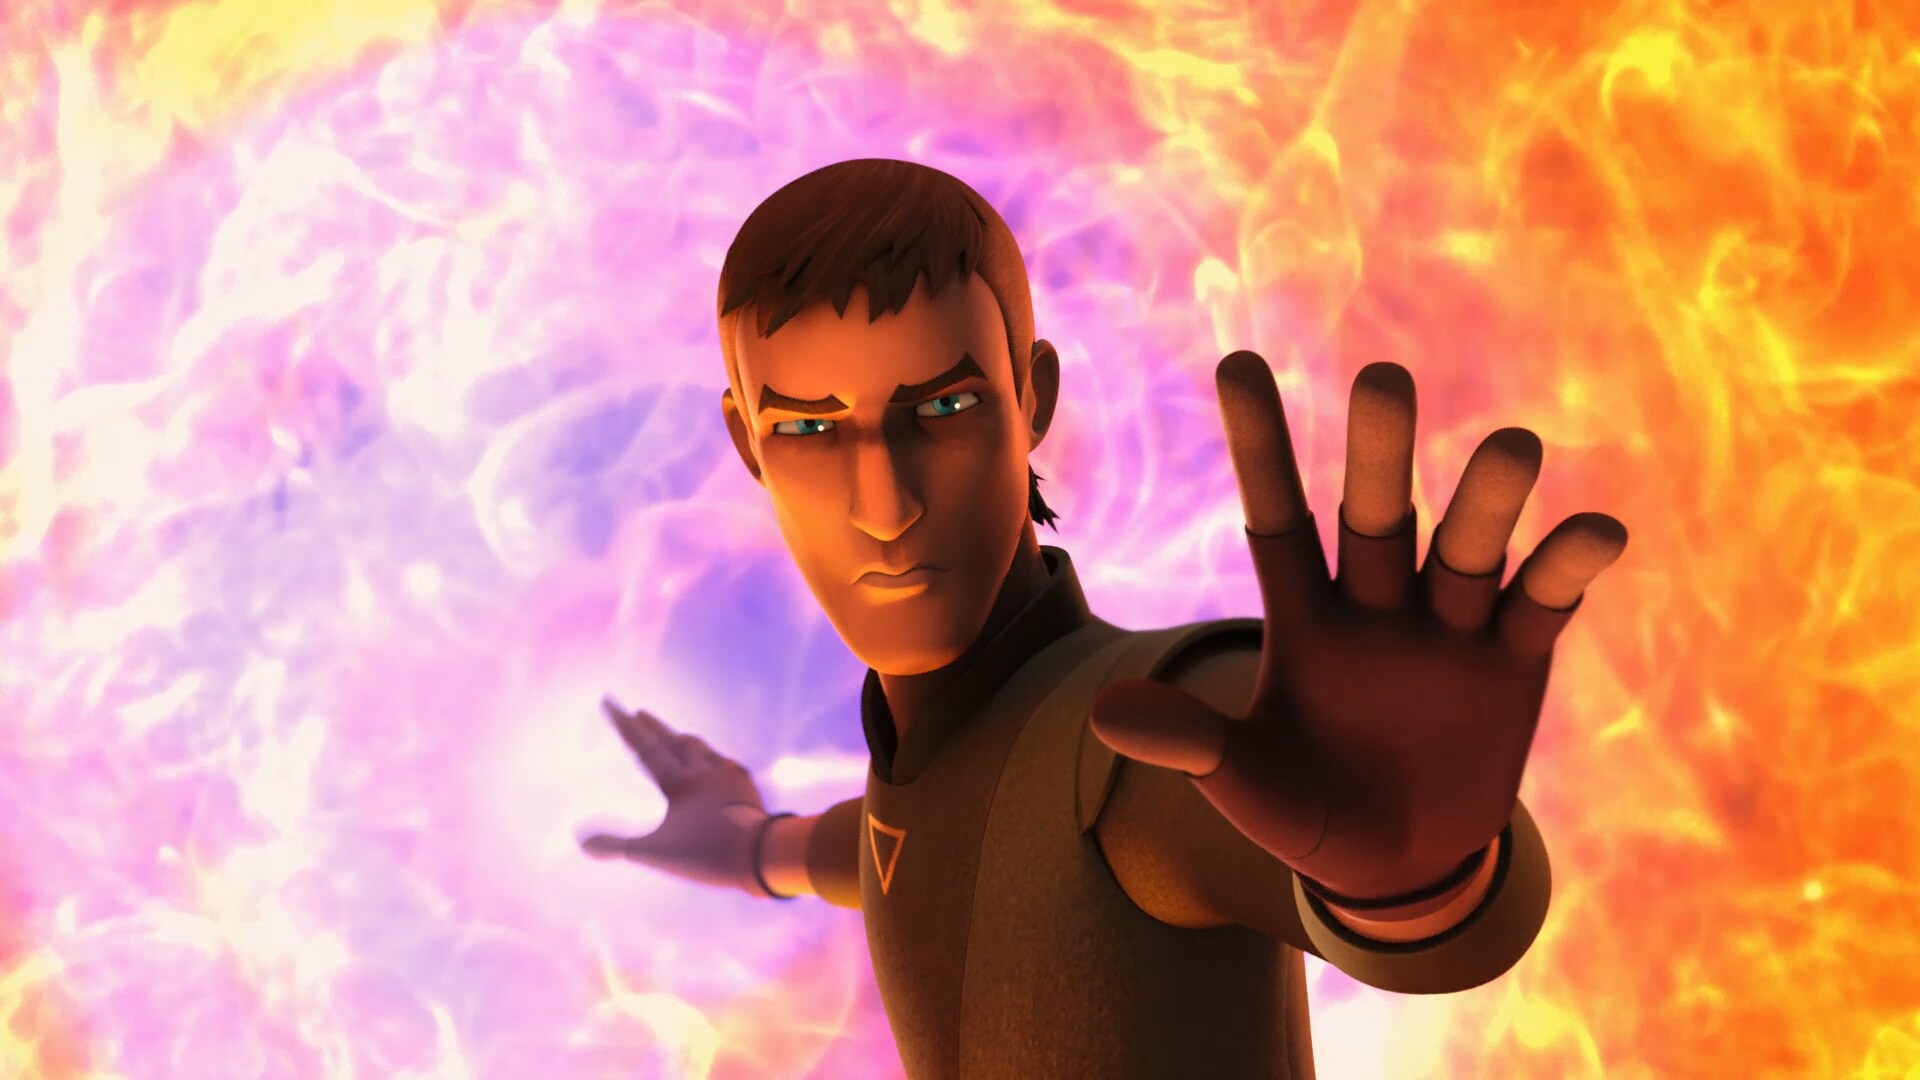 Star Wars Rebels - "Kanan and the Fire" Audio Cue